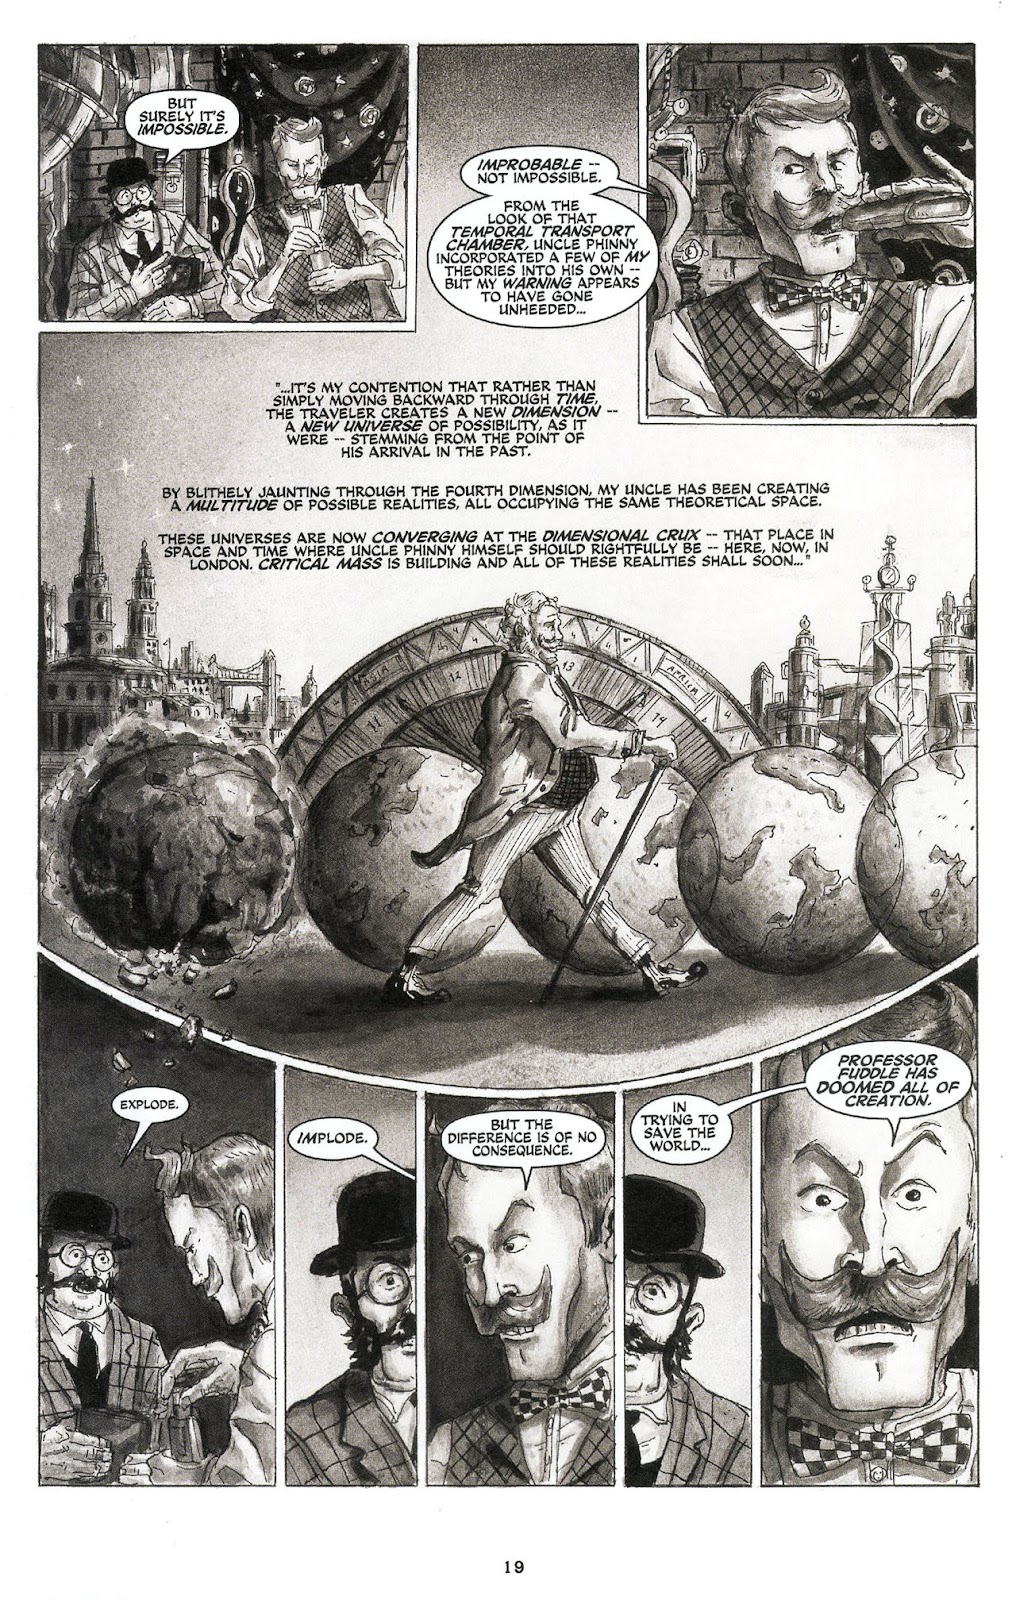 The Remarkable Worlds of Professor Phineas B. Fuddle issue 1 - Page 19